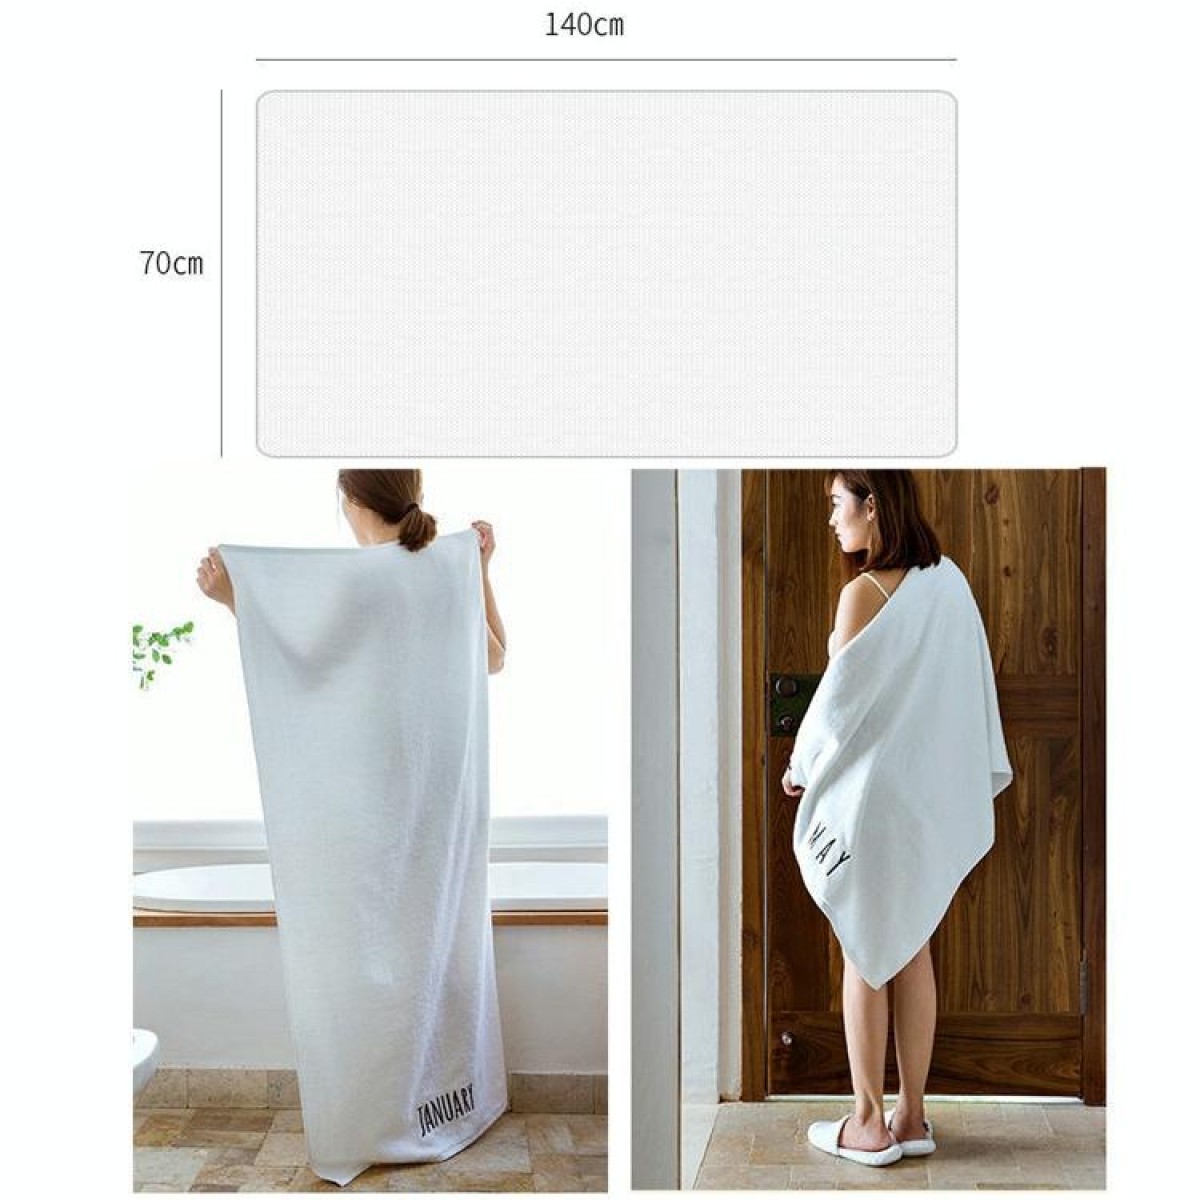 Month Embroidery Soft Absorbent Increase Thickened Adult Cotton Bath Towel, Pattern:February(White)